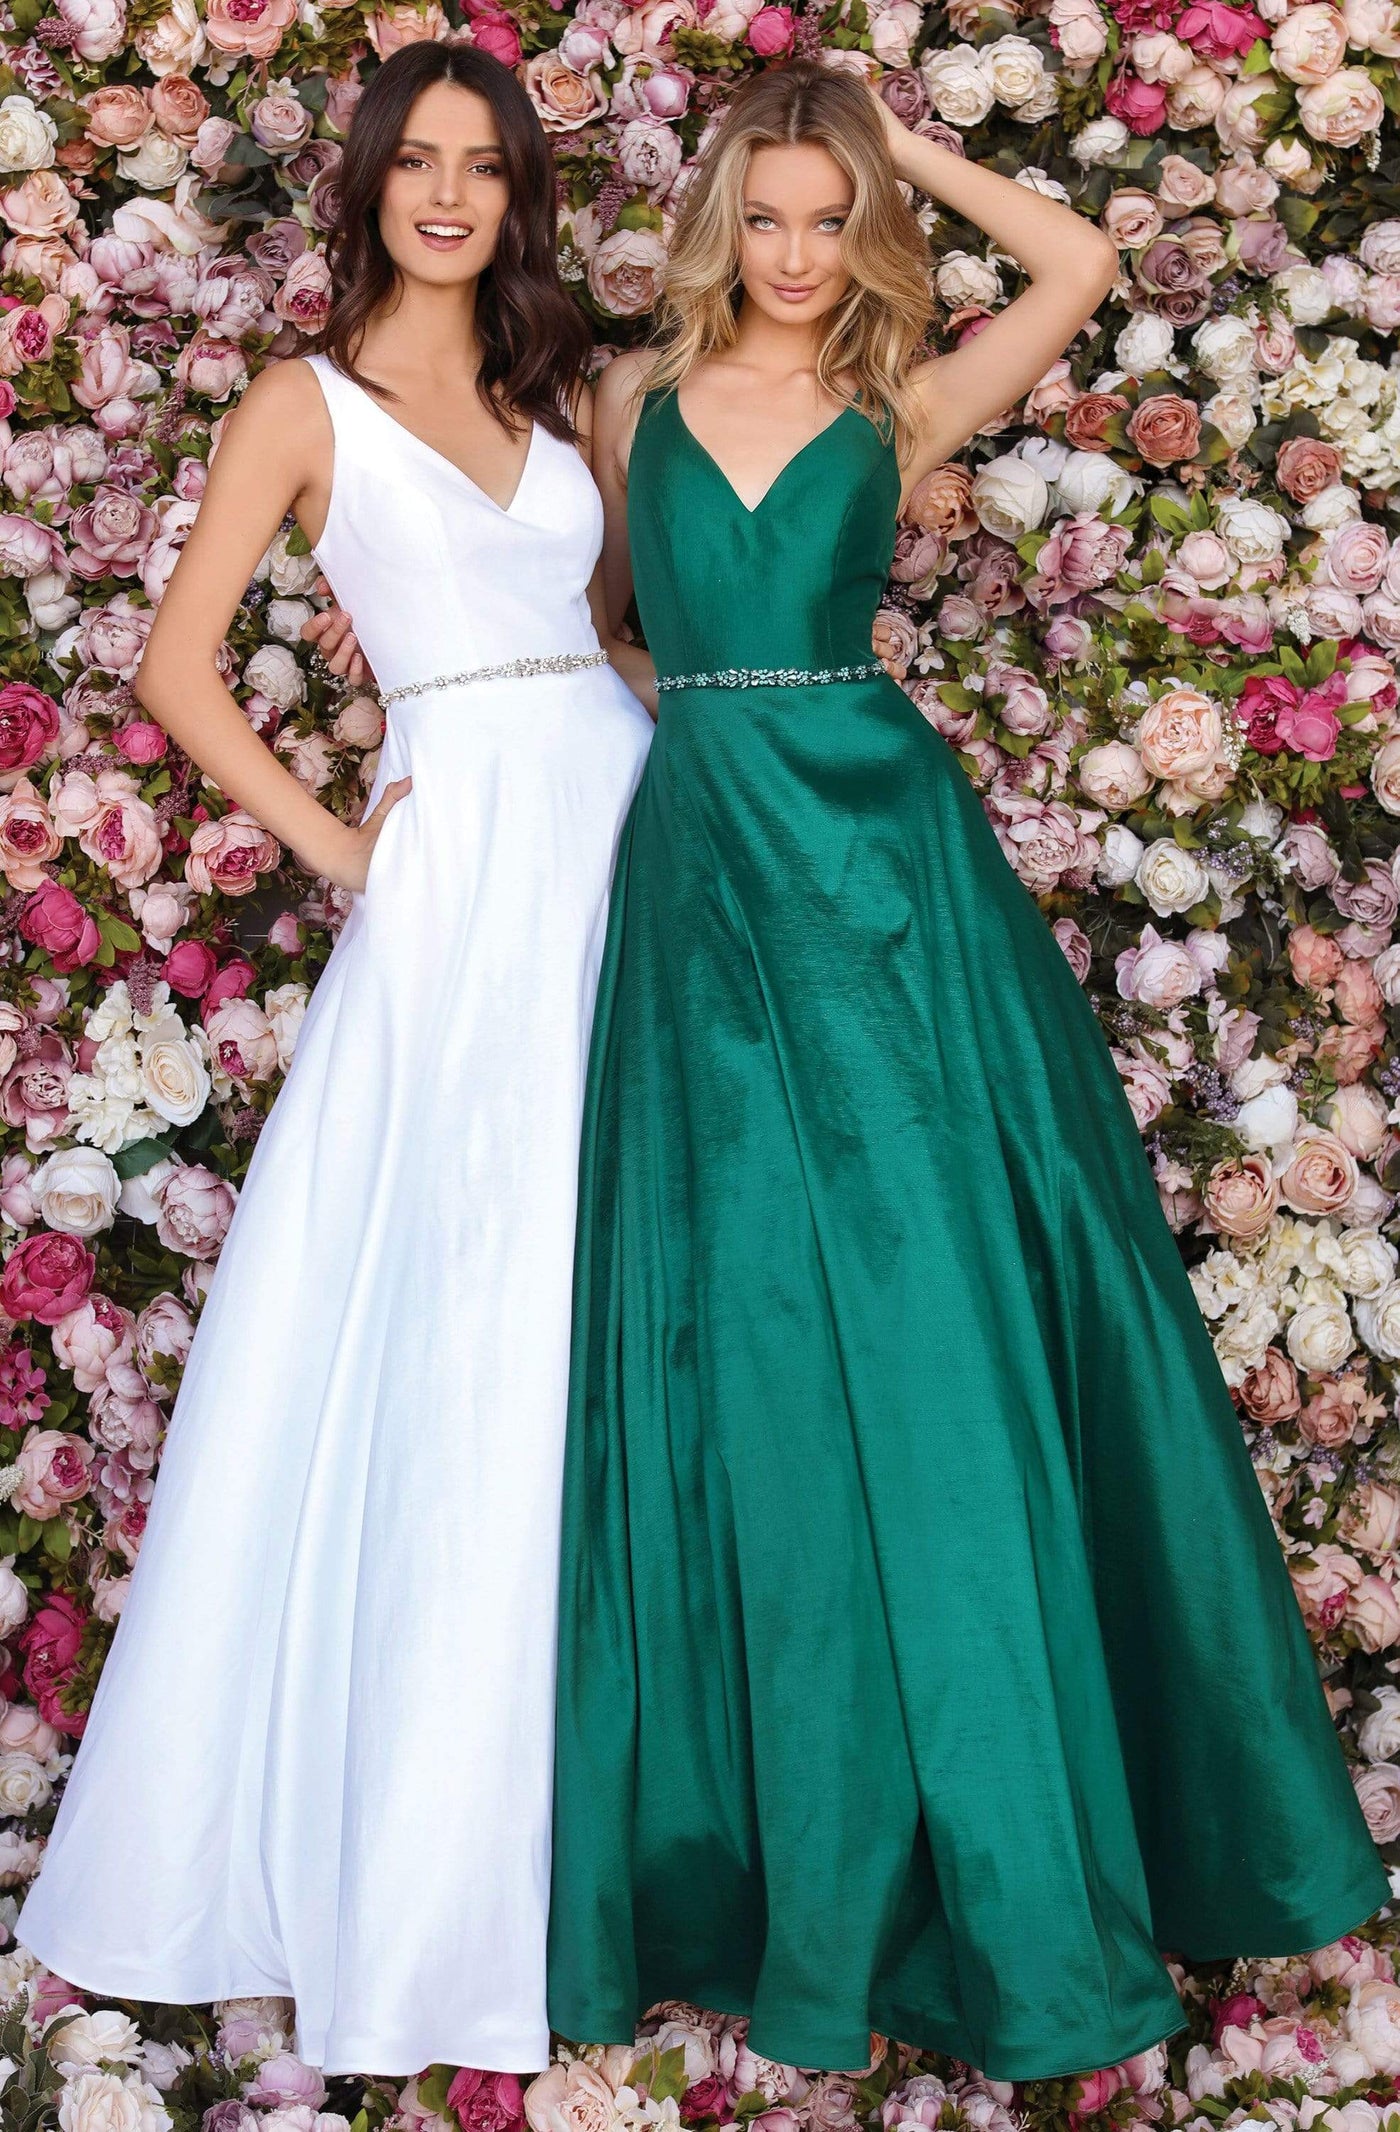 Clarisse - 8194 Sleeveless V Neck A-Line Gown with Beaded Belt Prom Dresses 0 / Forest Green